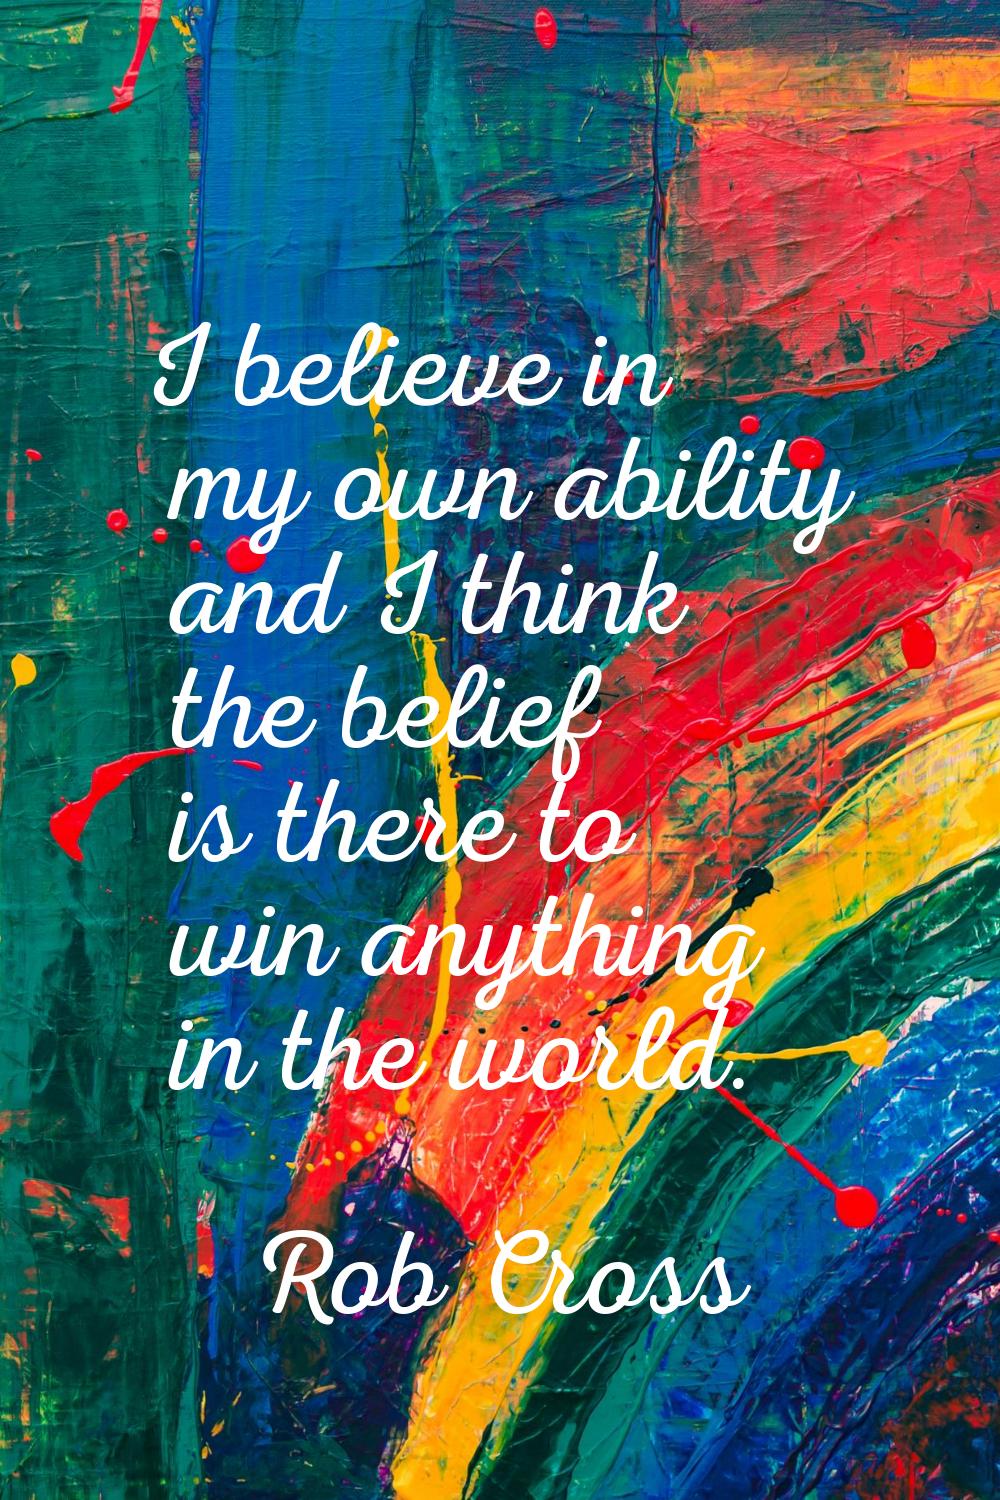 I believe in my own ability and I think the belief is there to win anything in the world.